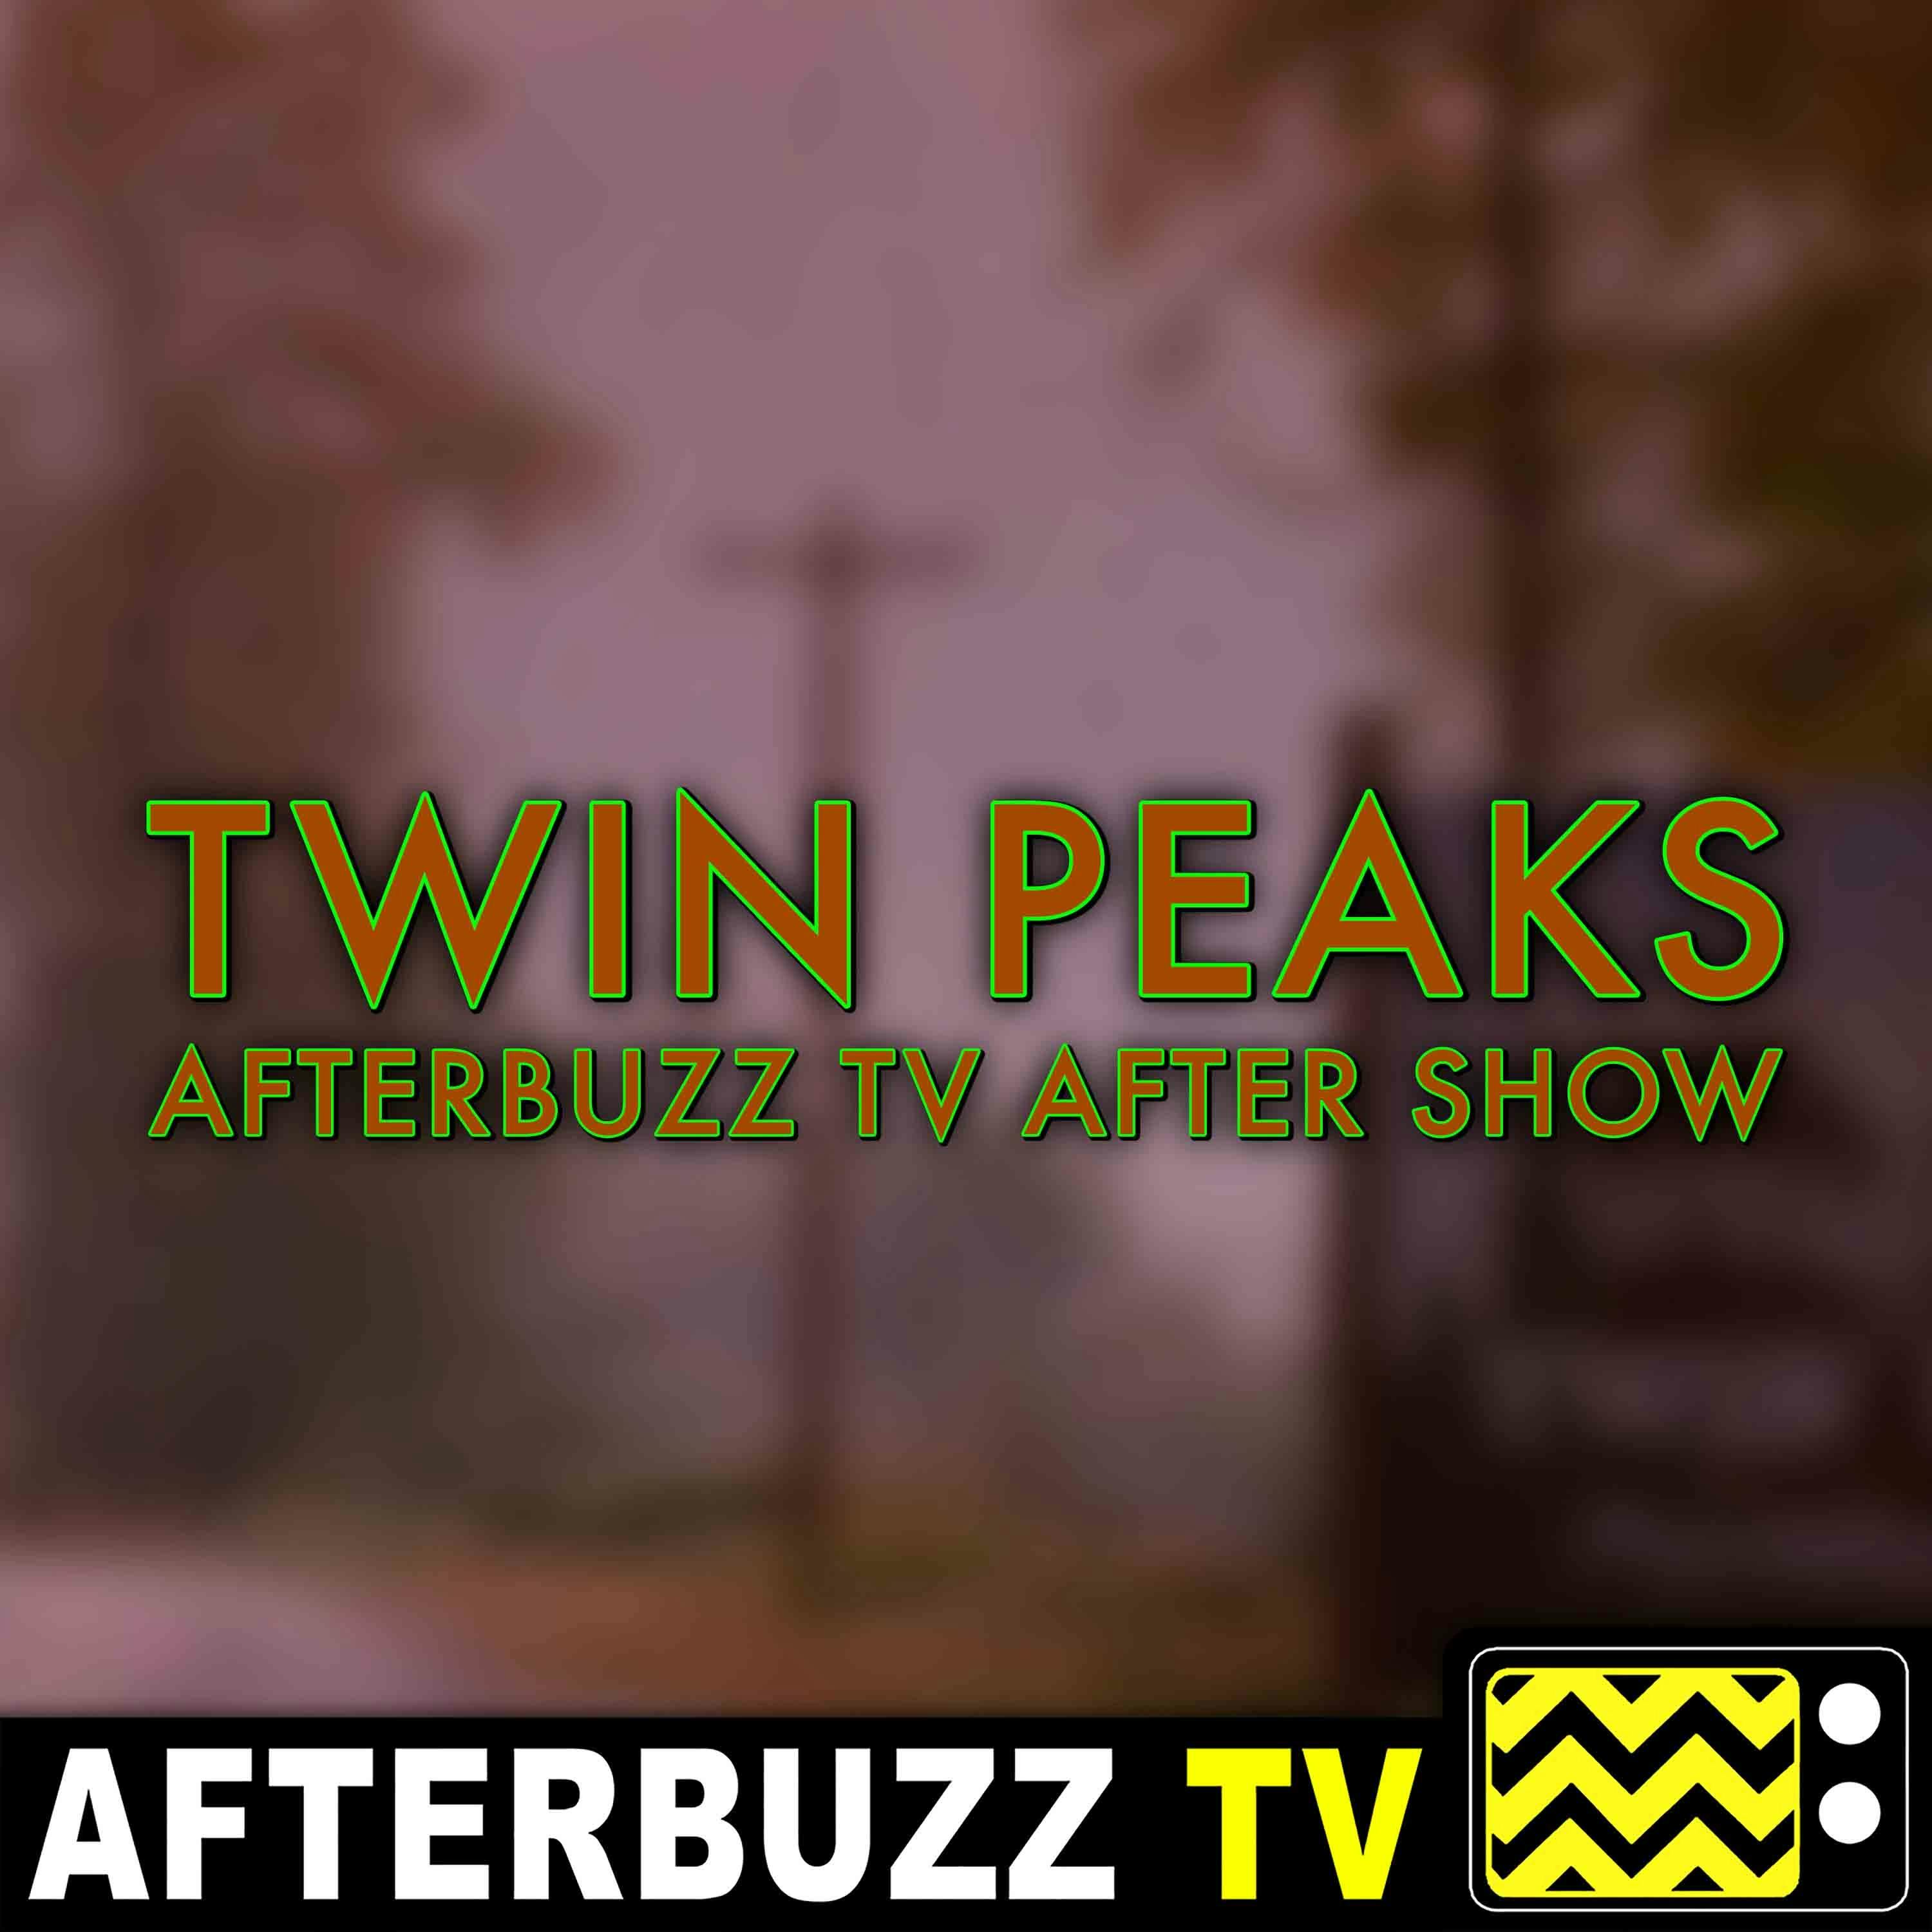 Twin Peaks S:1 | The Return: Part 10 E:10 | AfterBuzz TV AfterShow